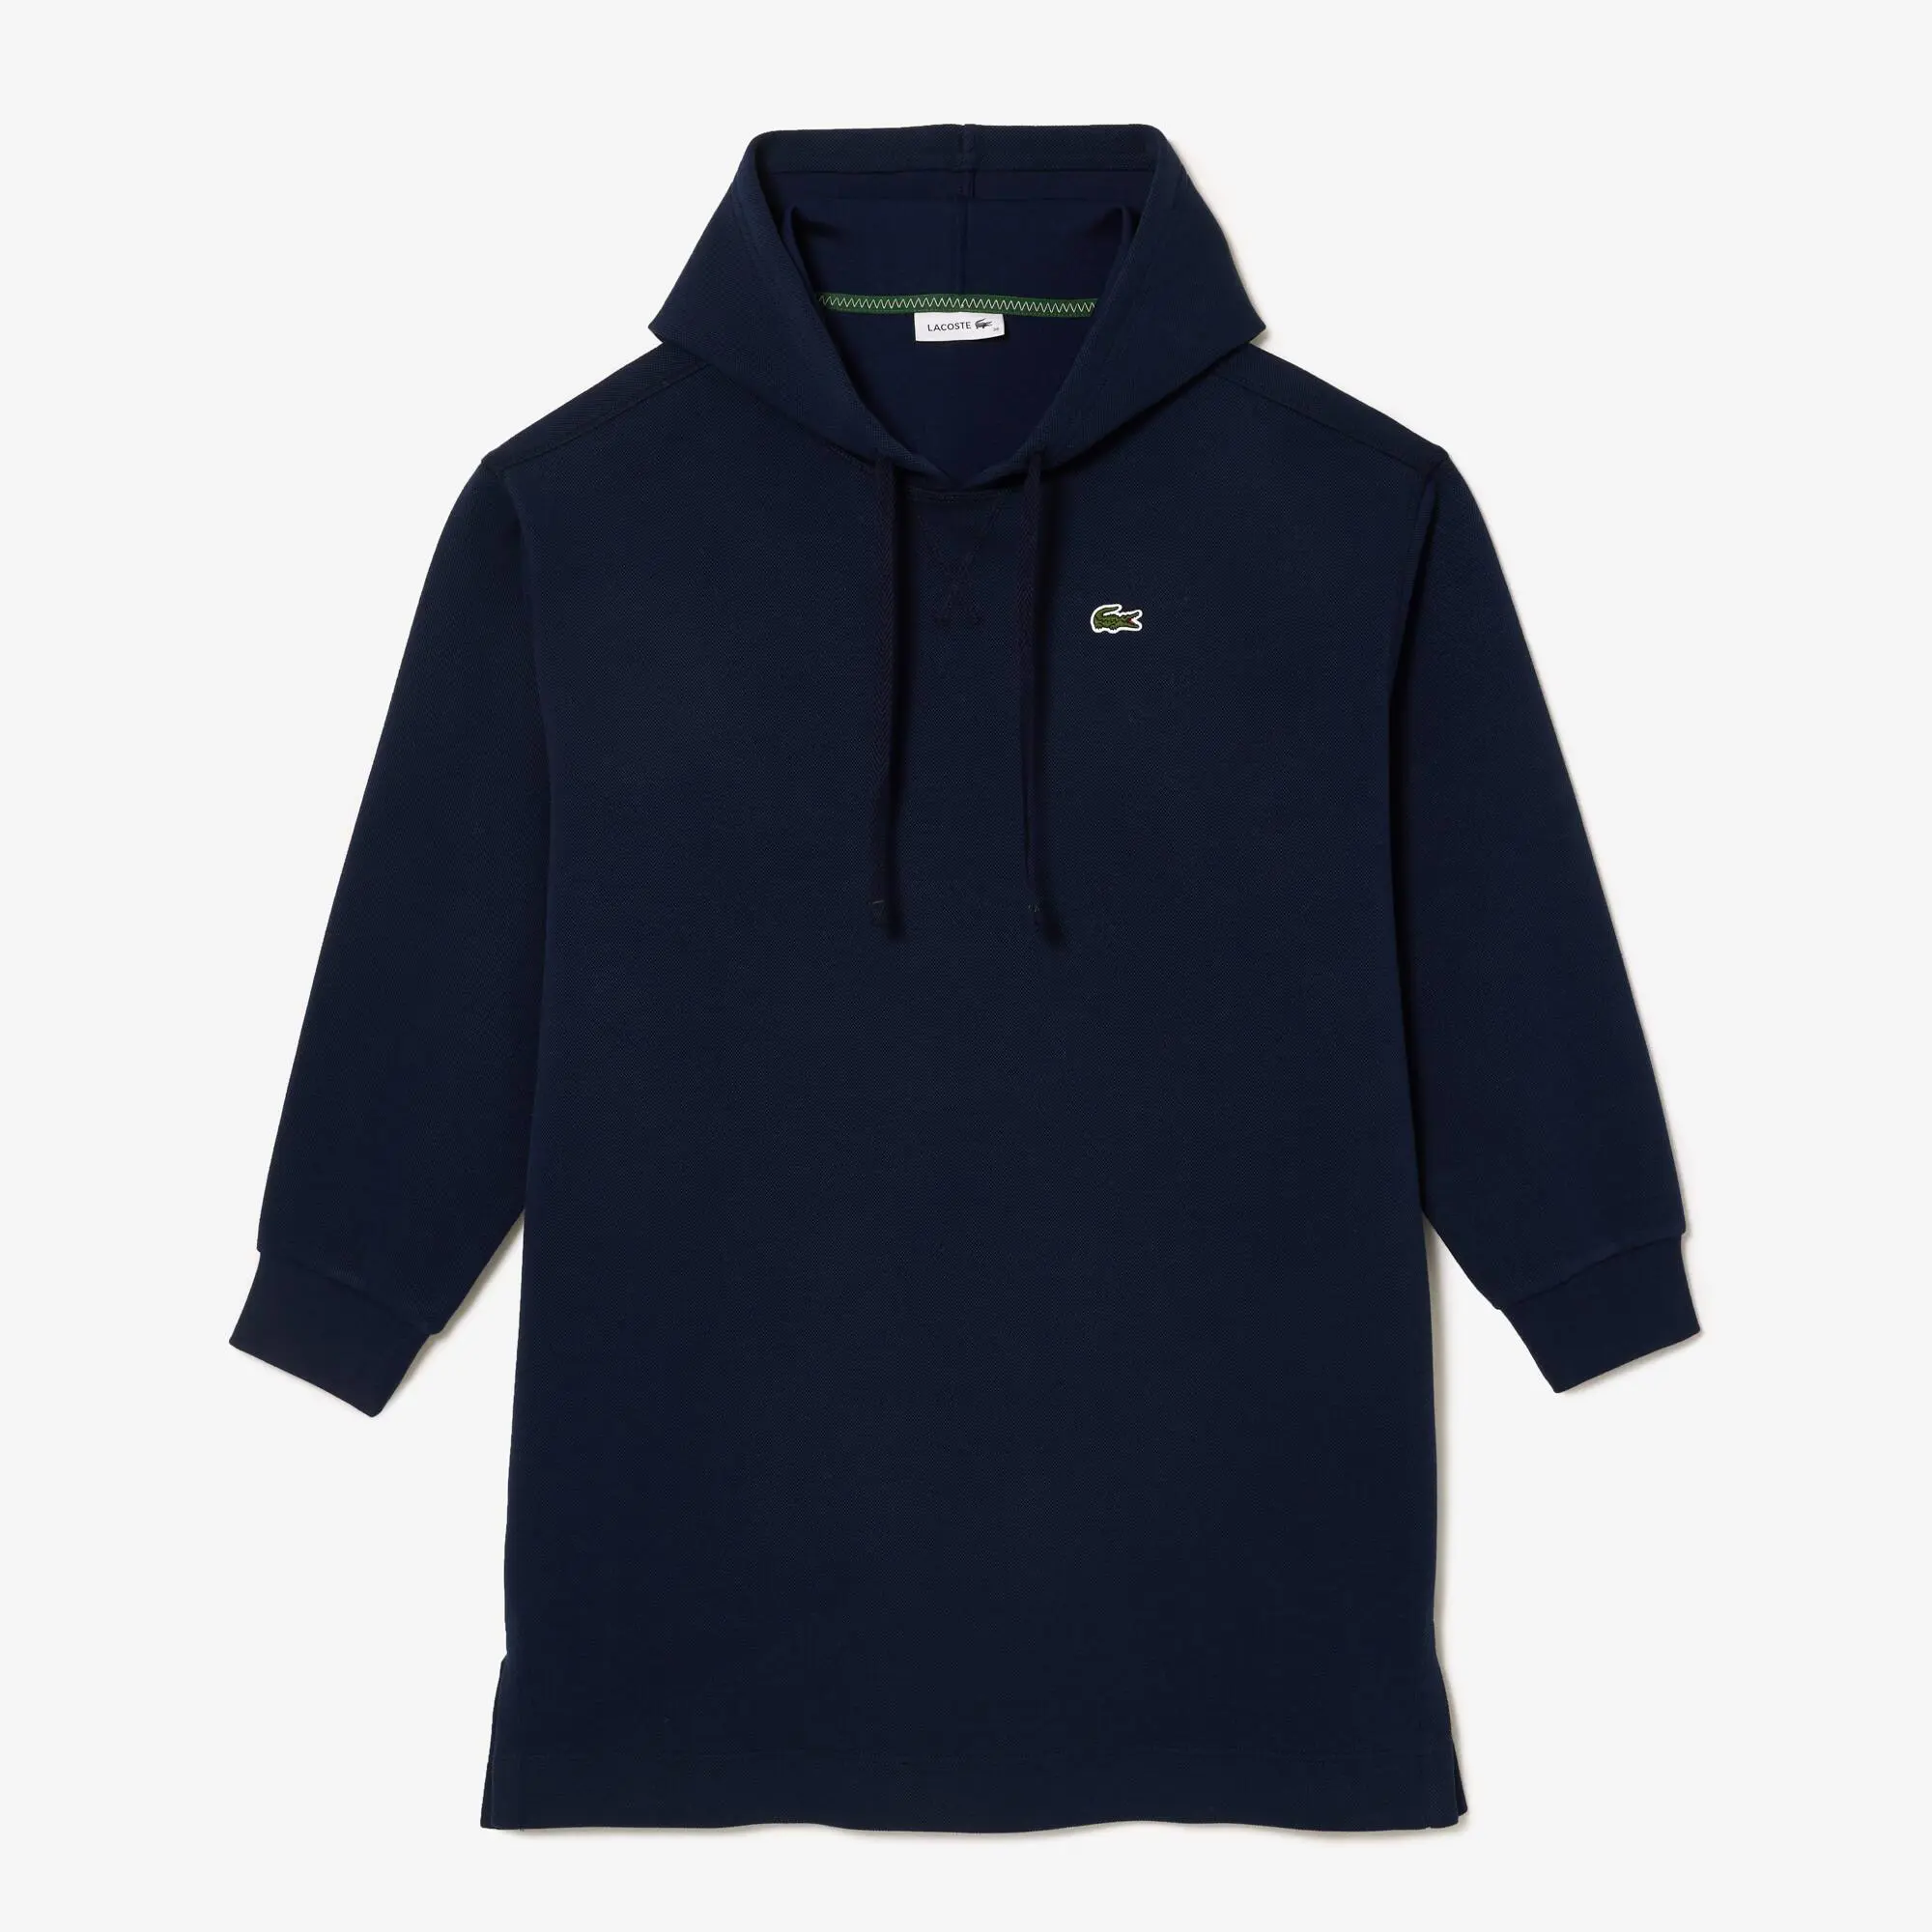 Lacoste Double Sided Piqué Hoodie Dress. 2